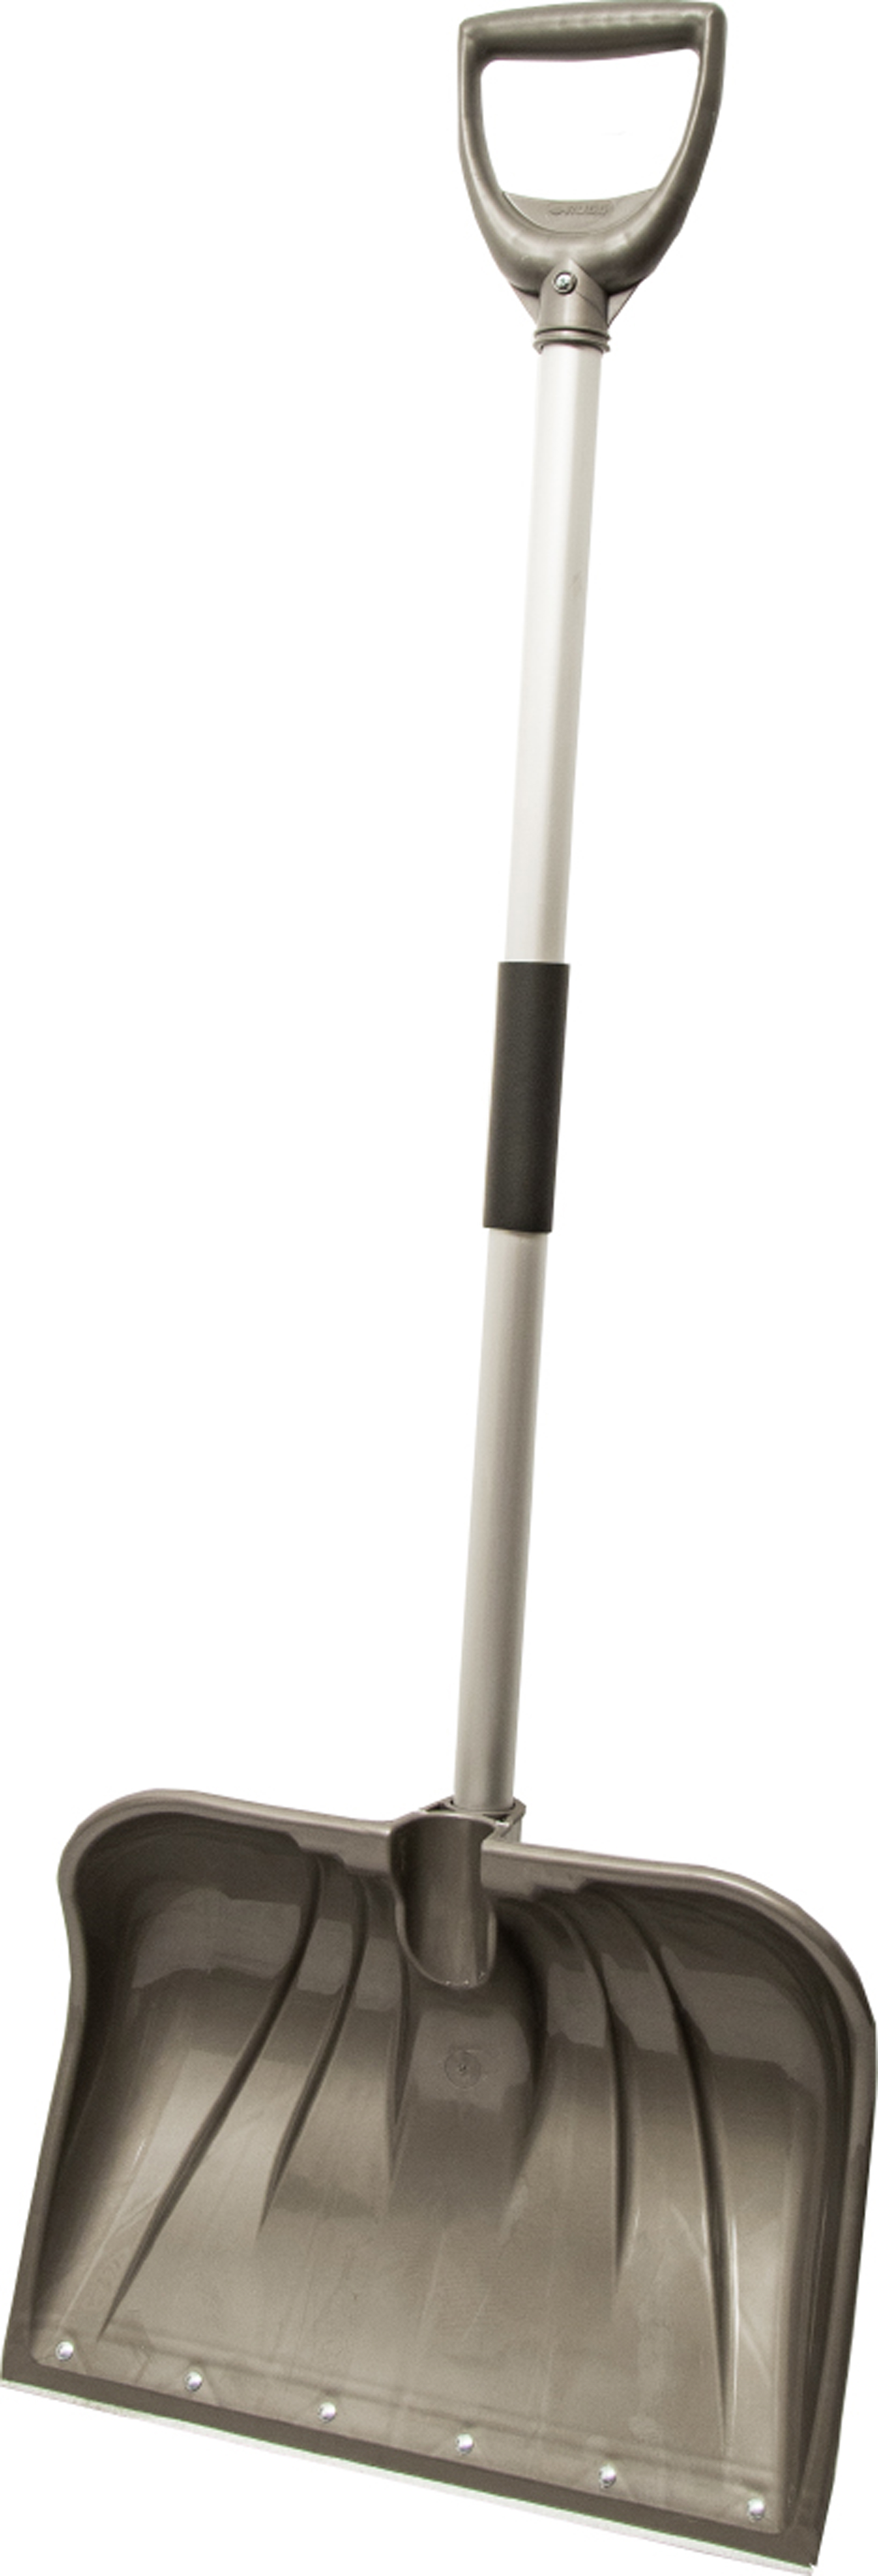 Pathmaster Pro R79 26PLW1 Snow Shovel 18 in. Aluminum Handle and Poly Combo Blade with Wearstrip